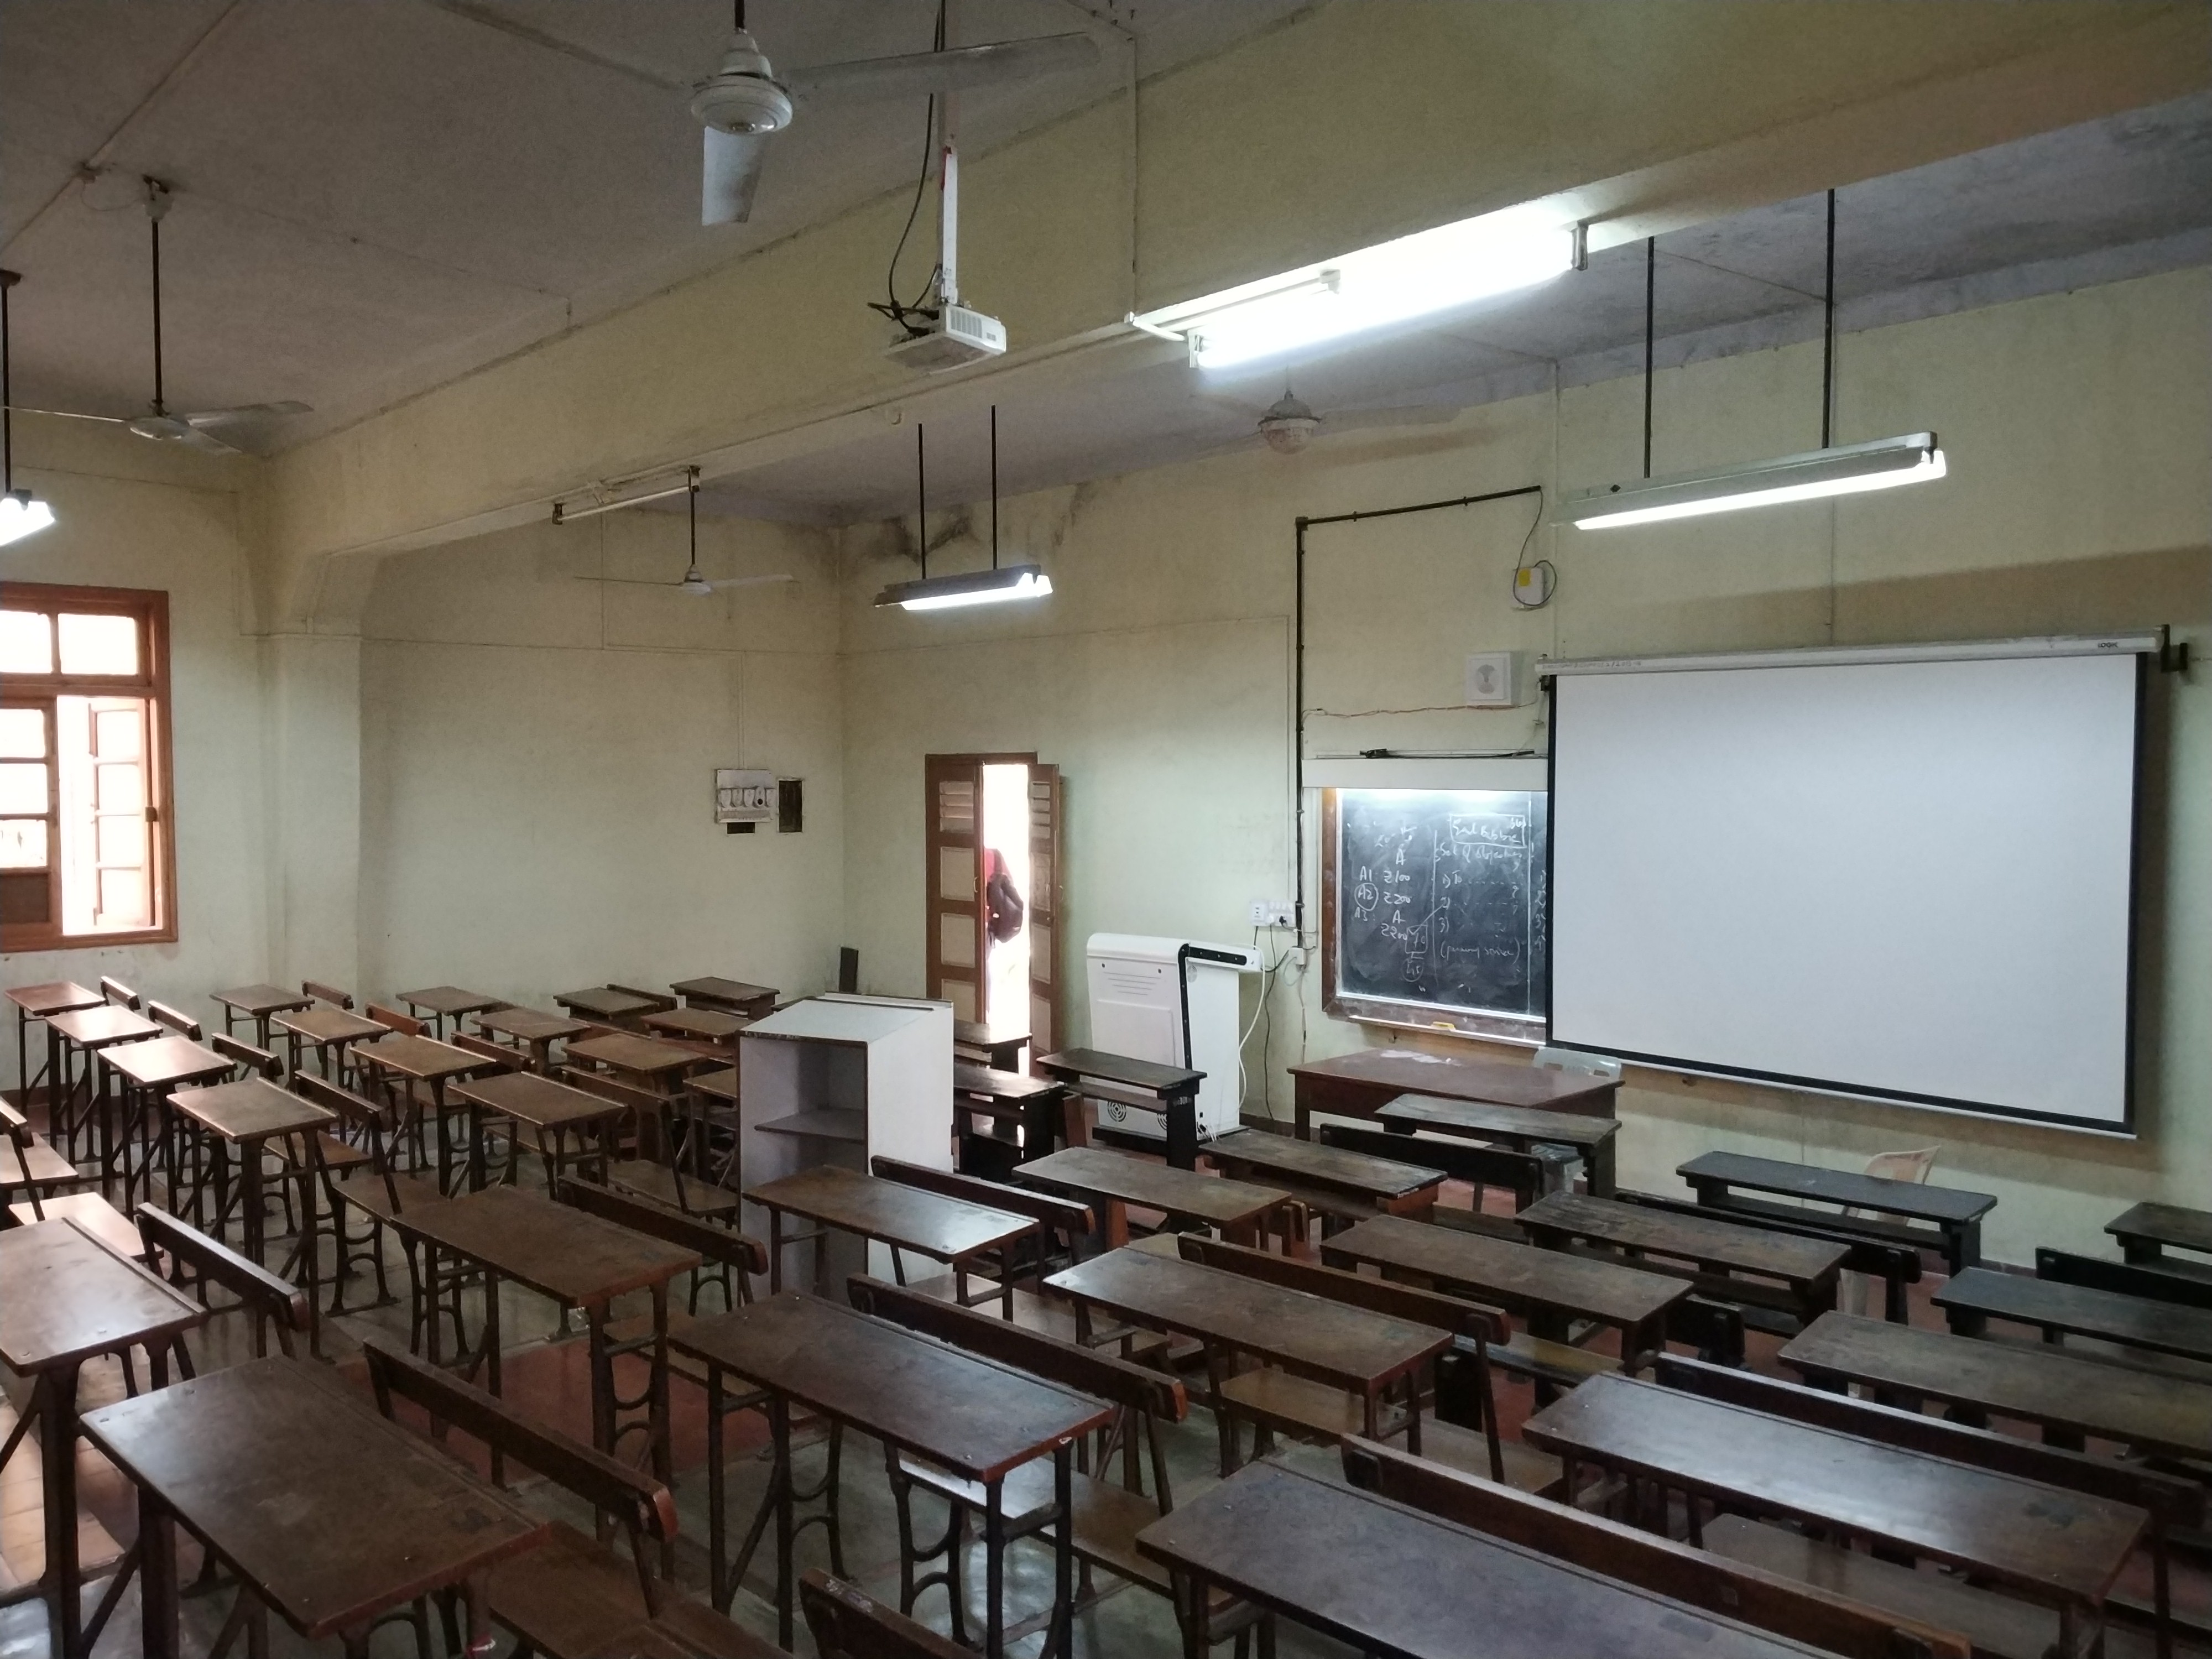 ICT enabled Hall No.6